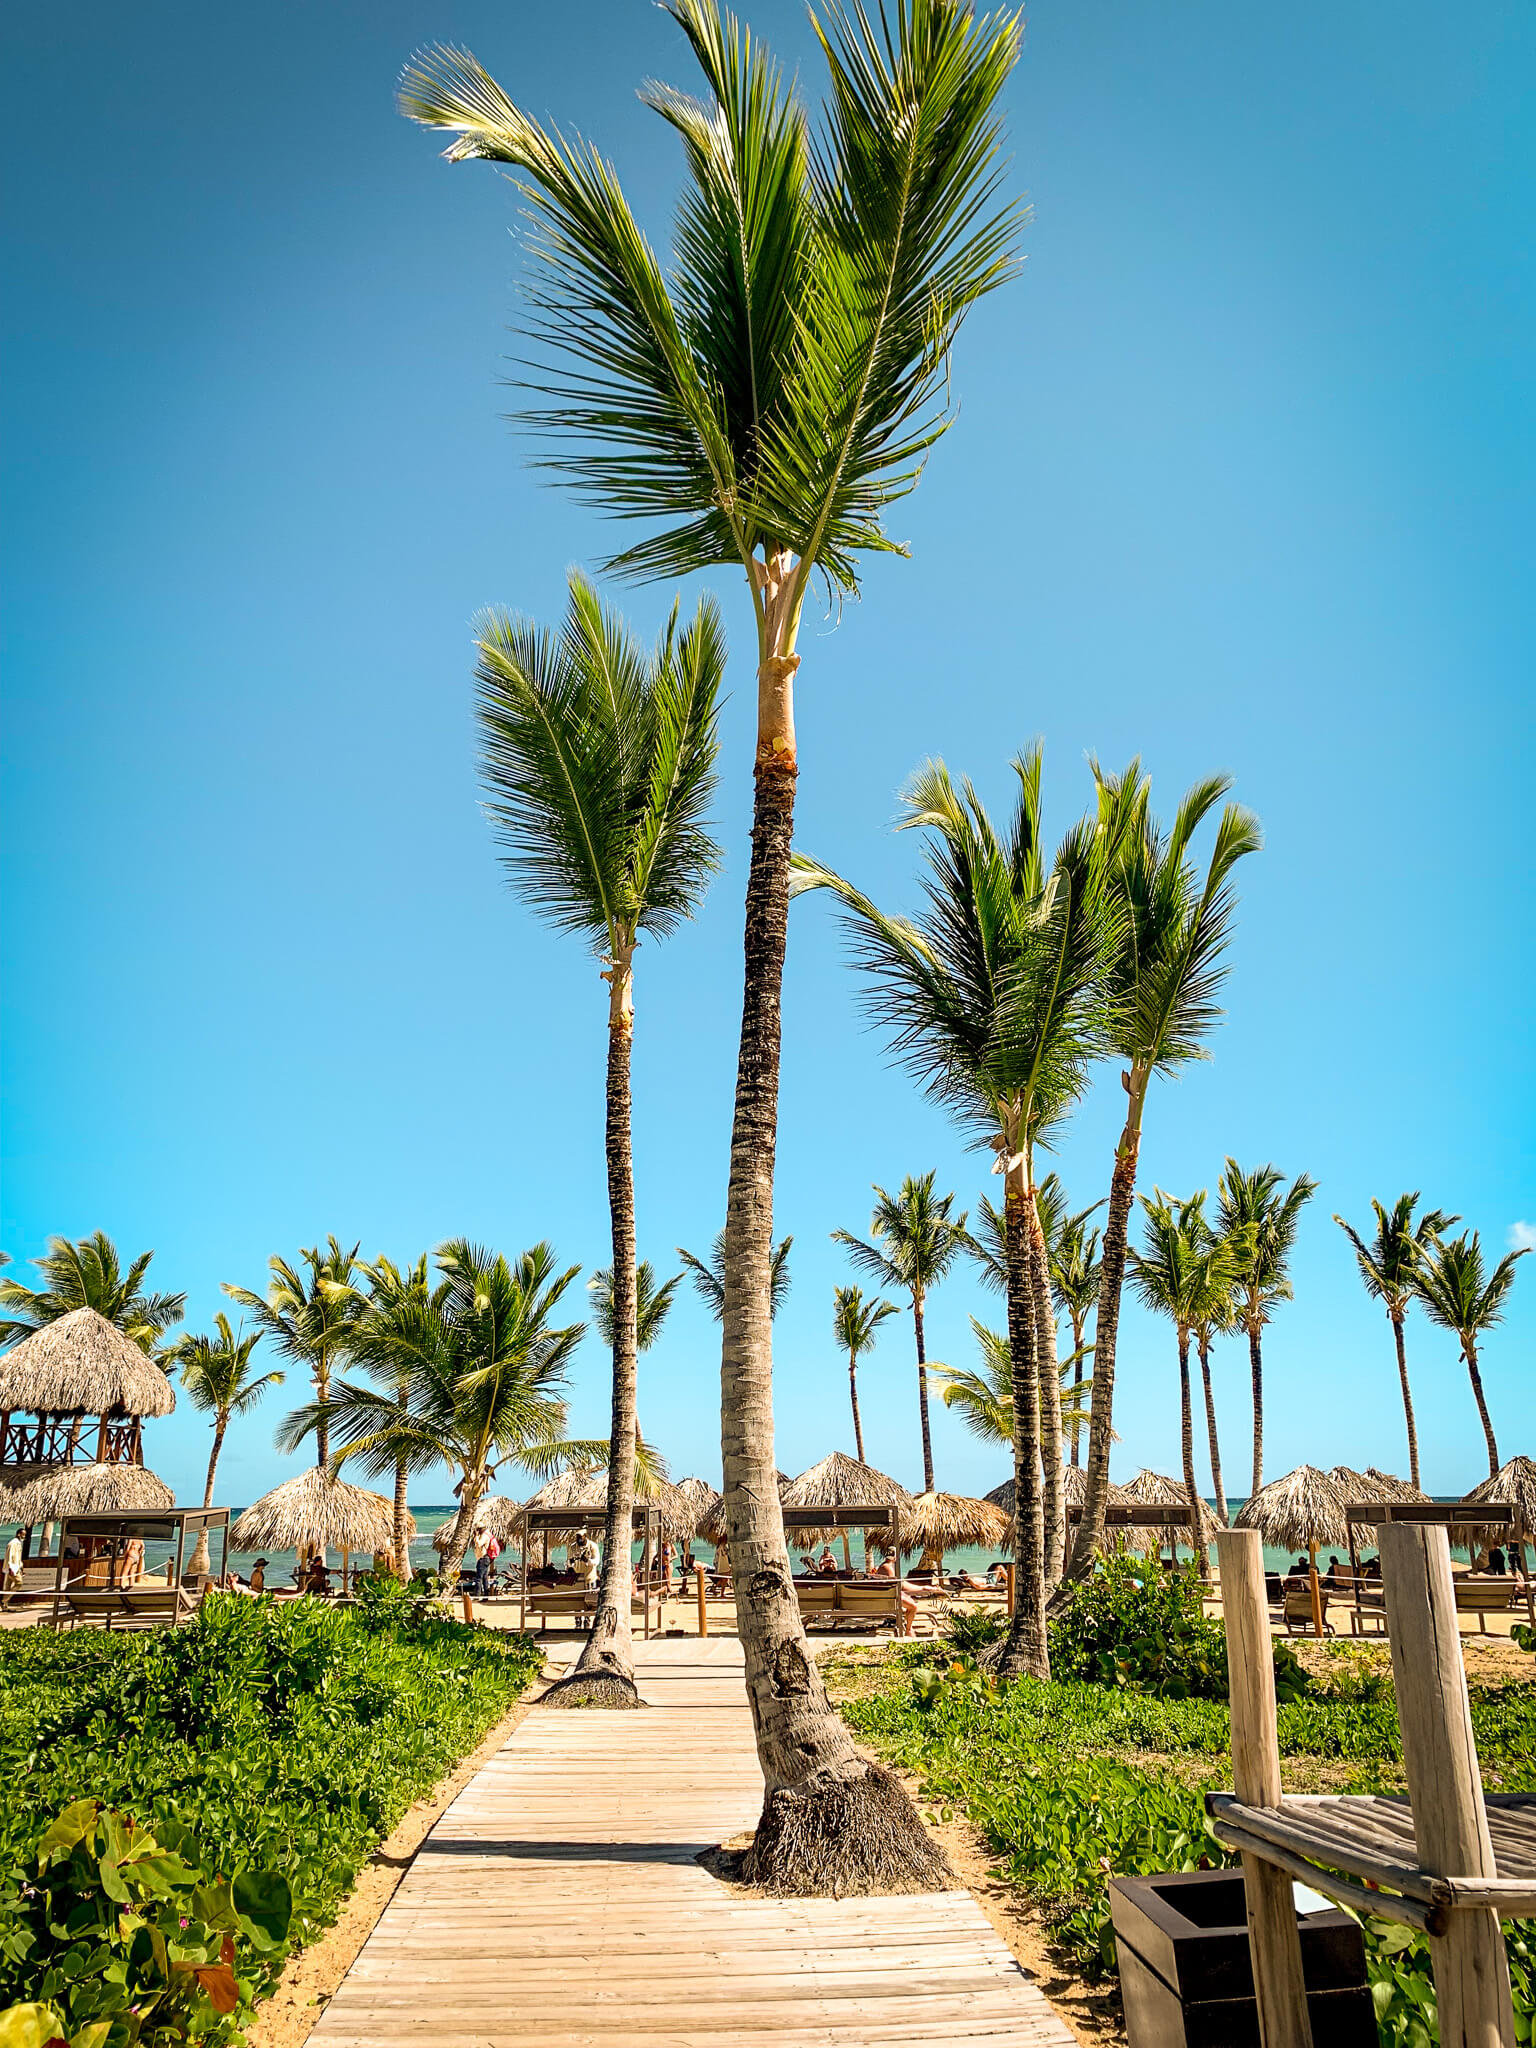 The path to the beach at Excellence El Carmen